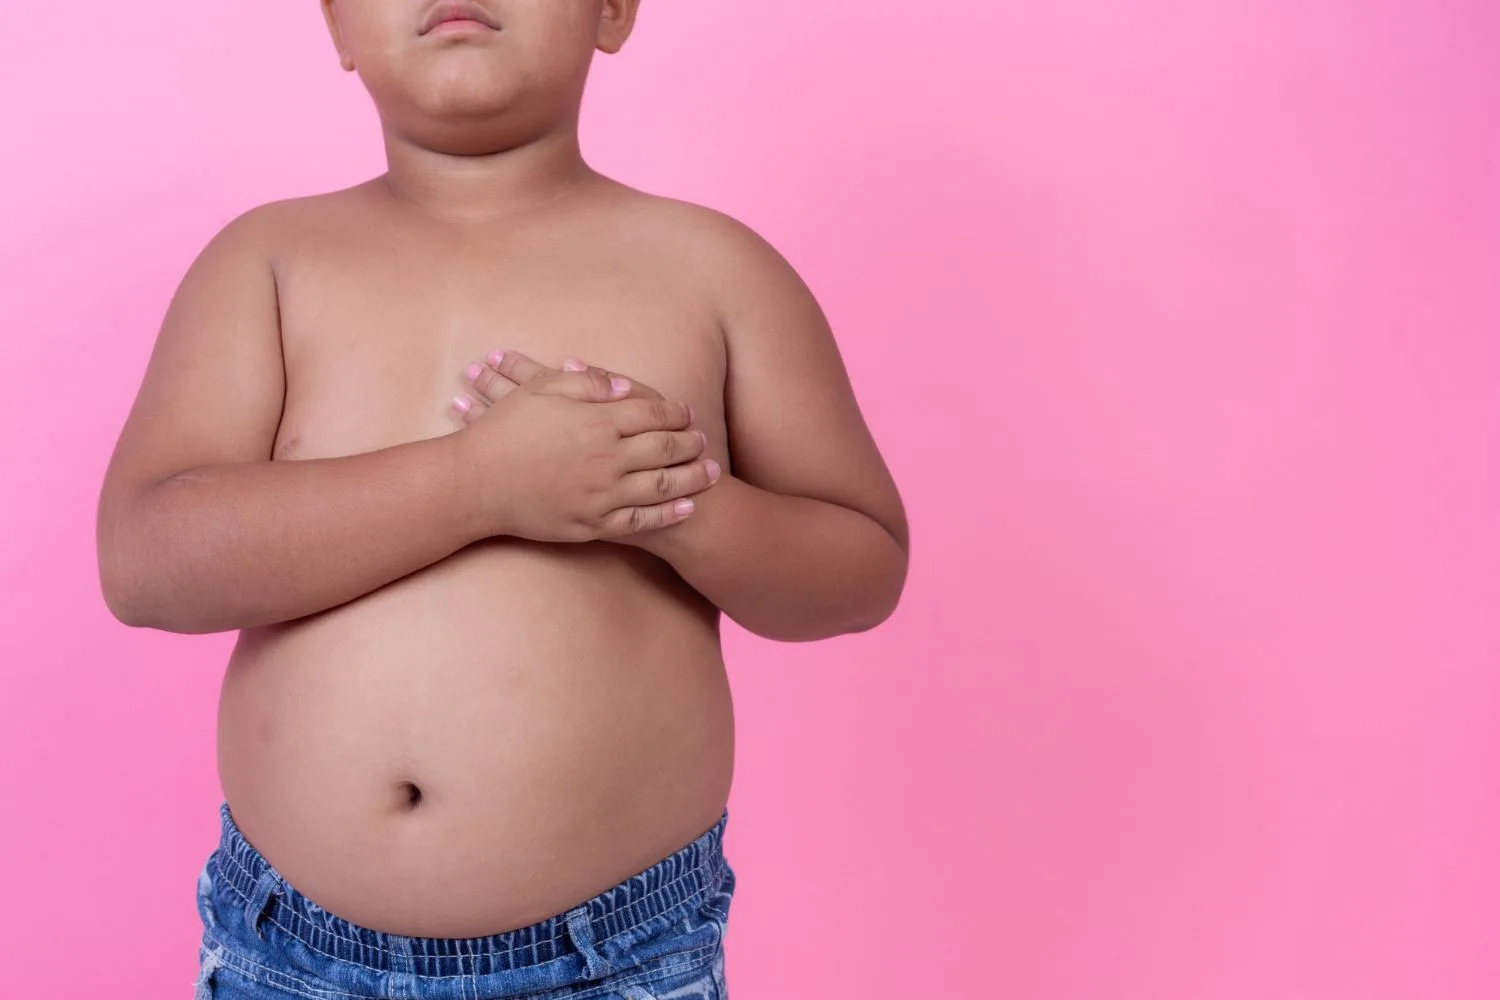 Unhealthy Eating Habits Increase Middle Childhood Obesity Risk